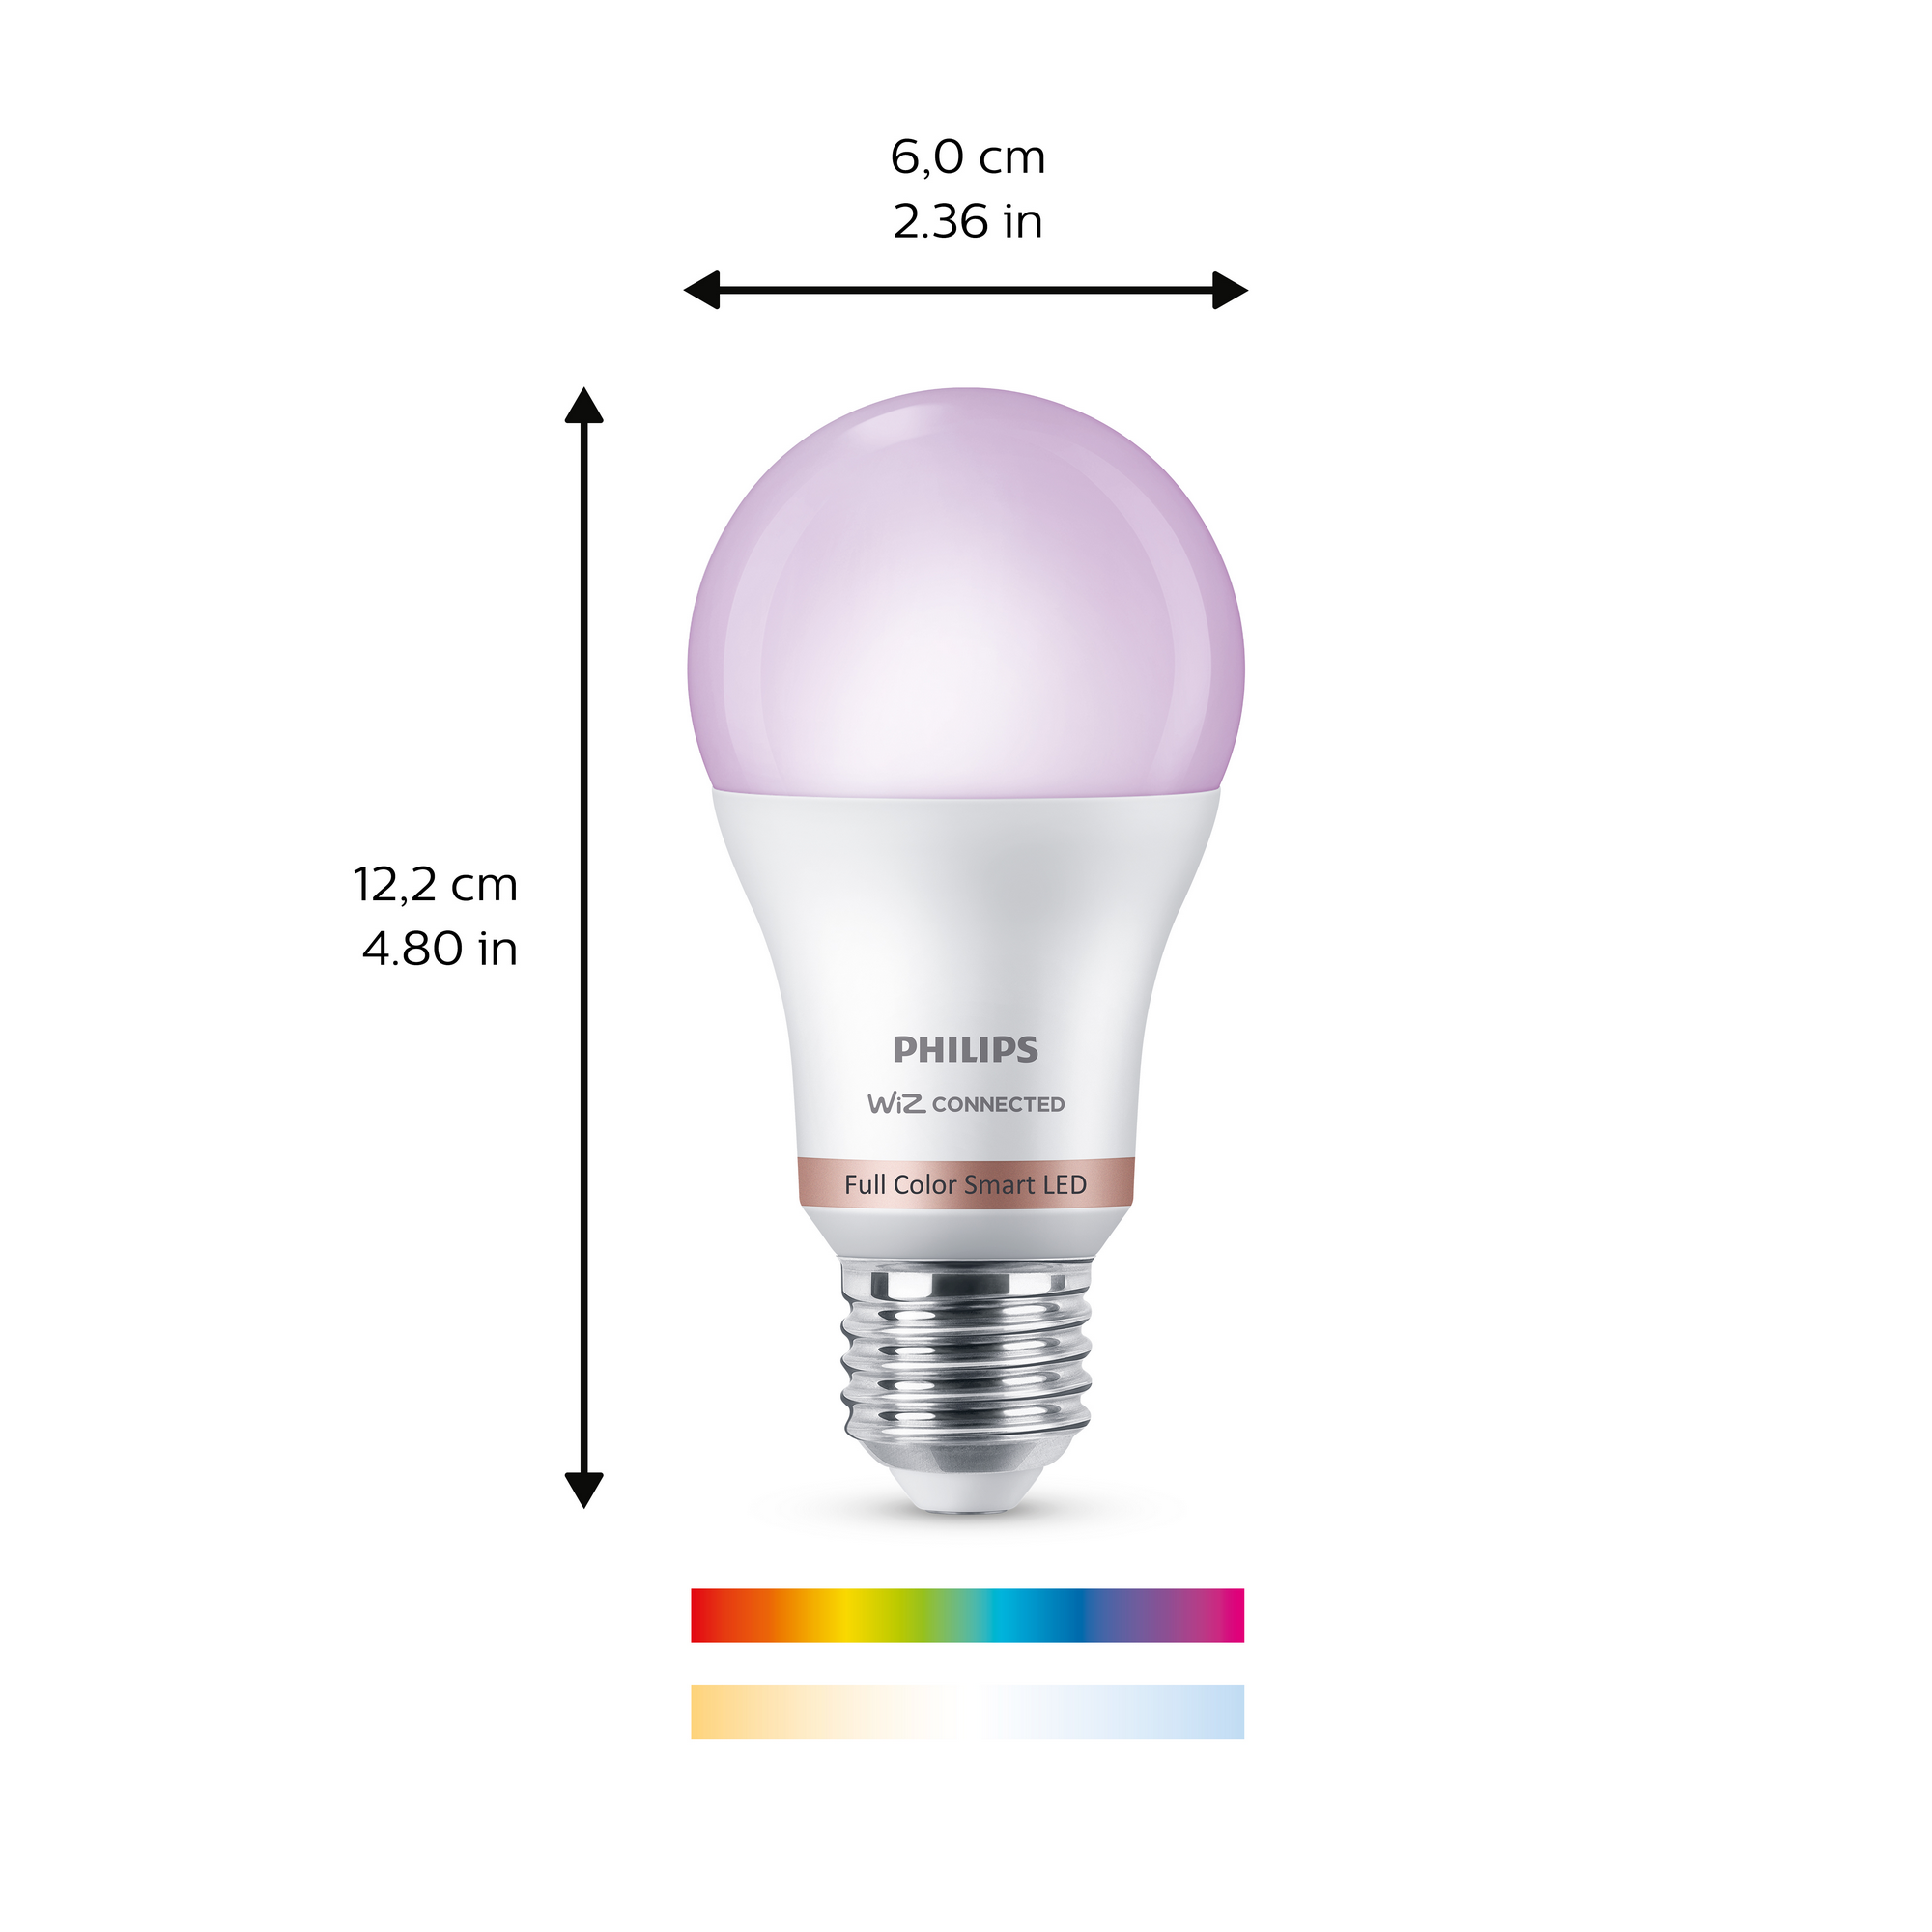 LED-Lampe 'SmartLED' 806 lm E27 Glühlampe weiß + product picture